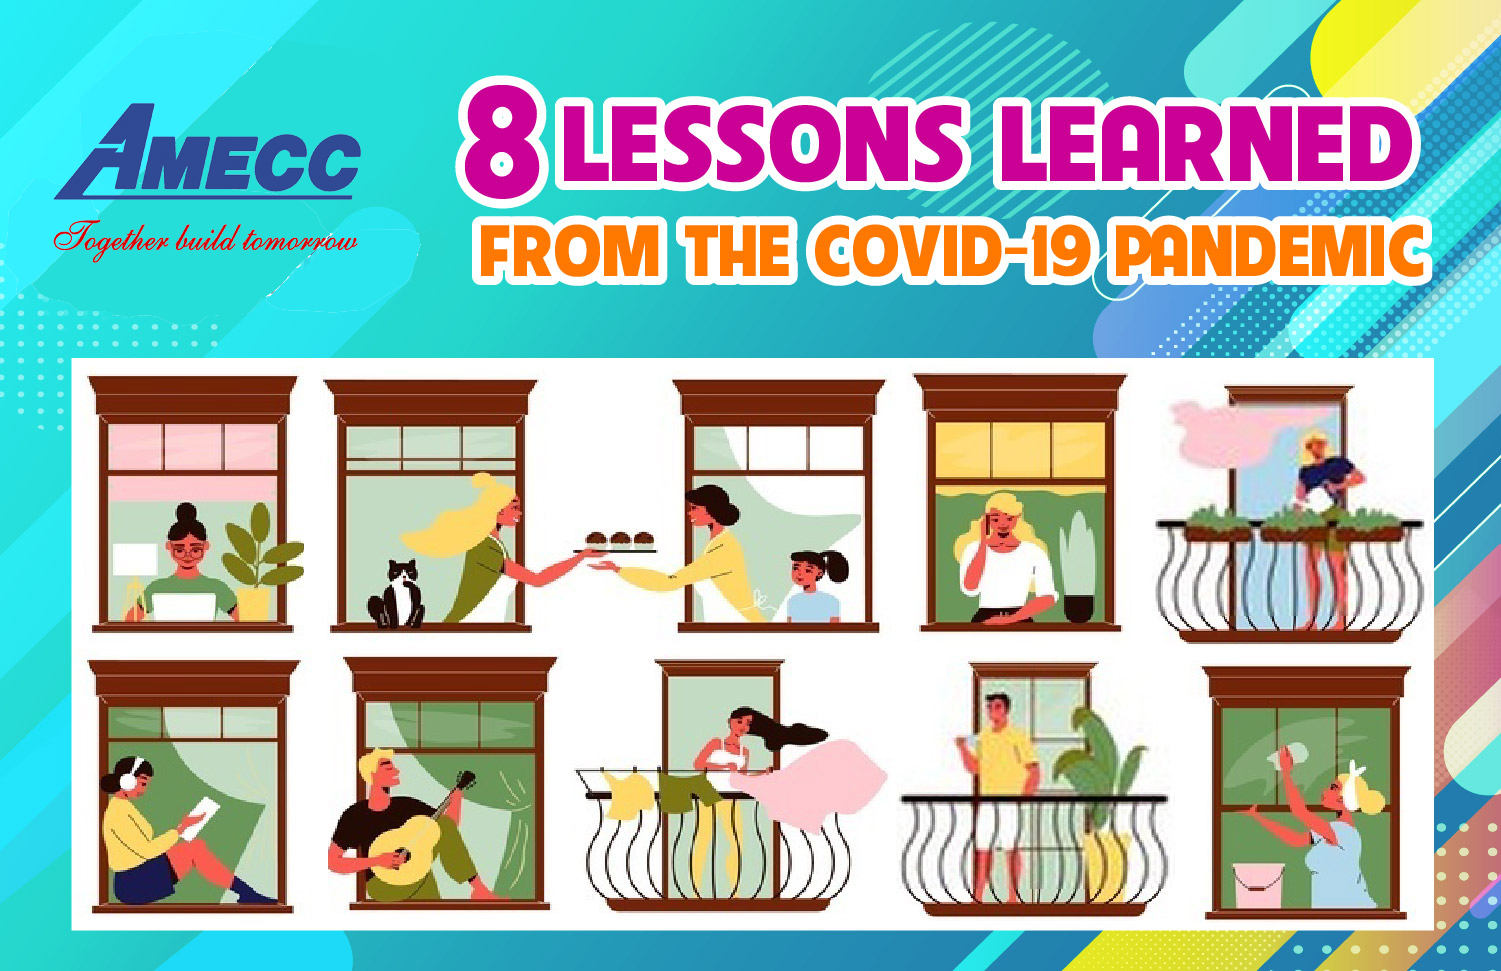 AMECC - 8 Lessons Learned From The Covid-19 Pandemic